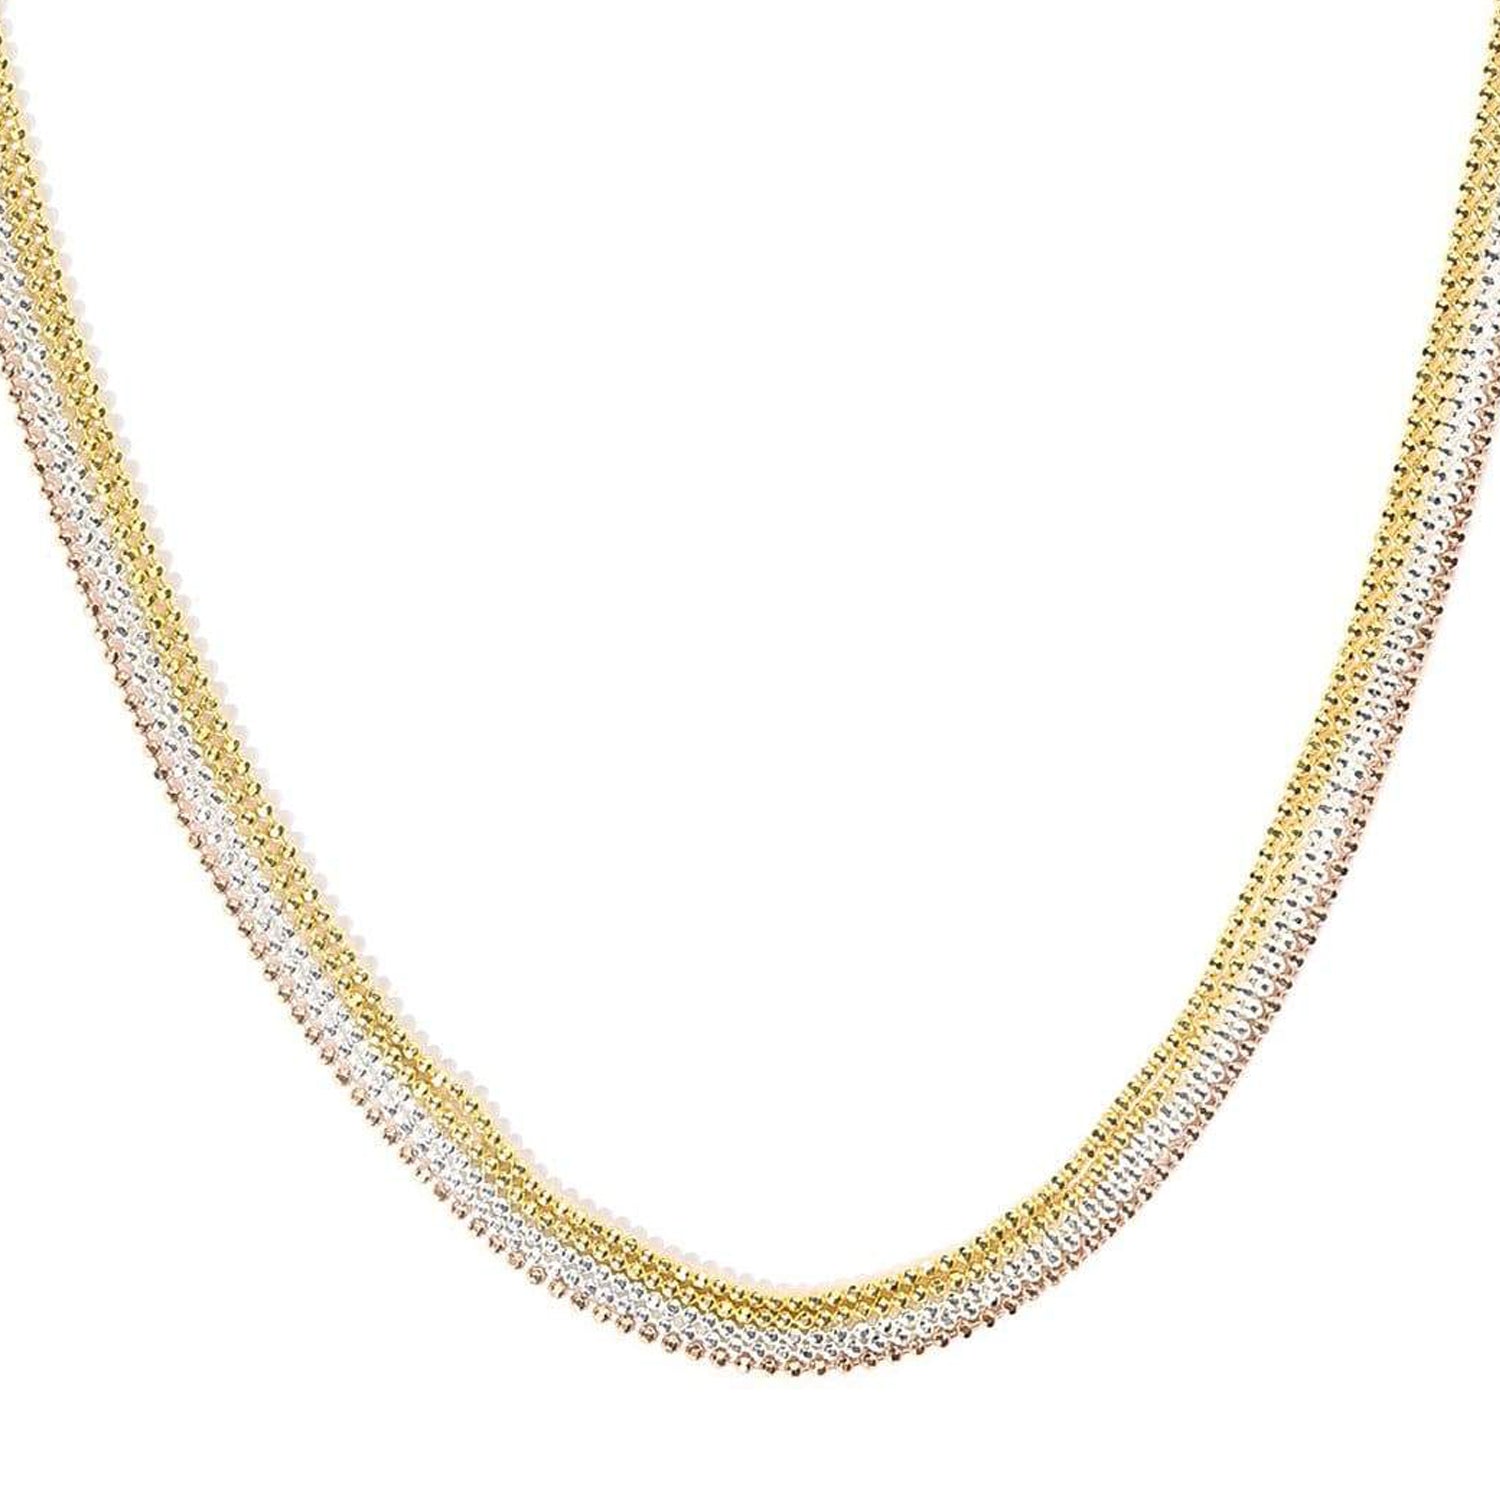 Glamourous Triple Tone 925 Silver Necklace